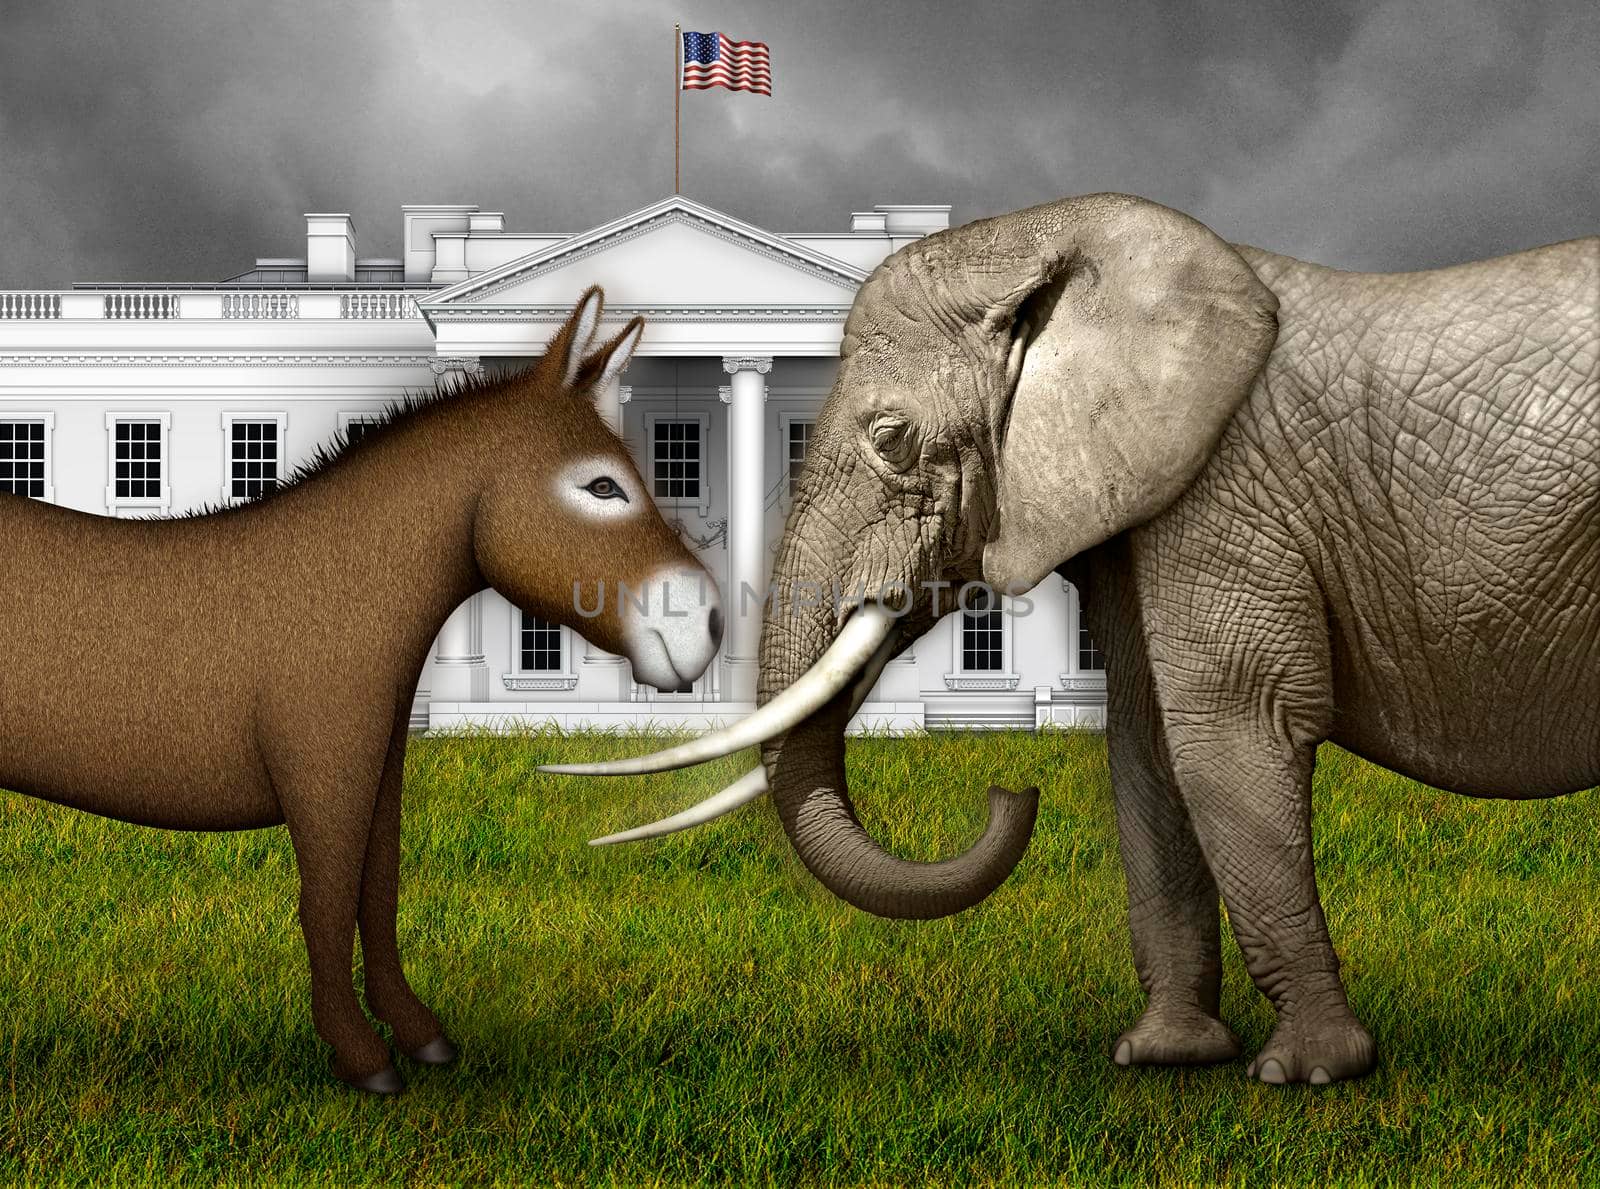 Donkey and Elephant ready for battle on the lawn in front of the north side of the White House. 3D Illustration